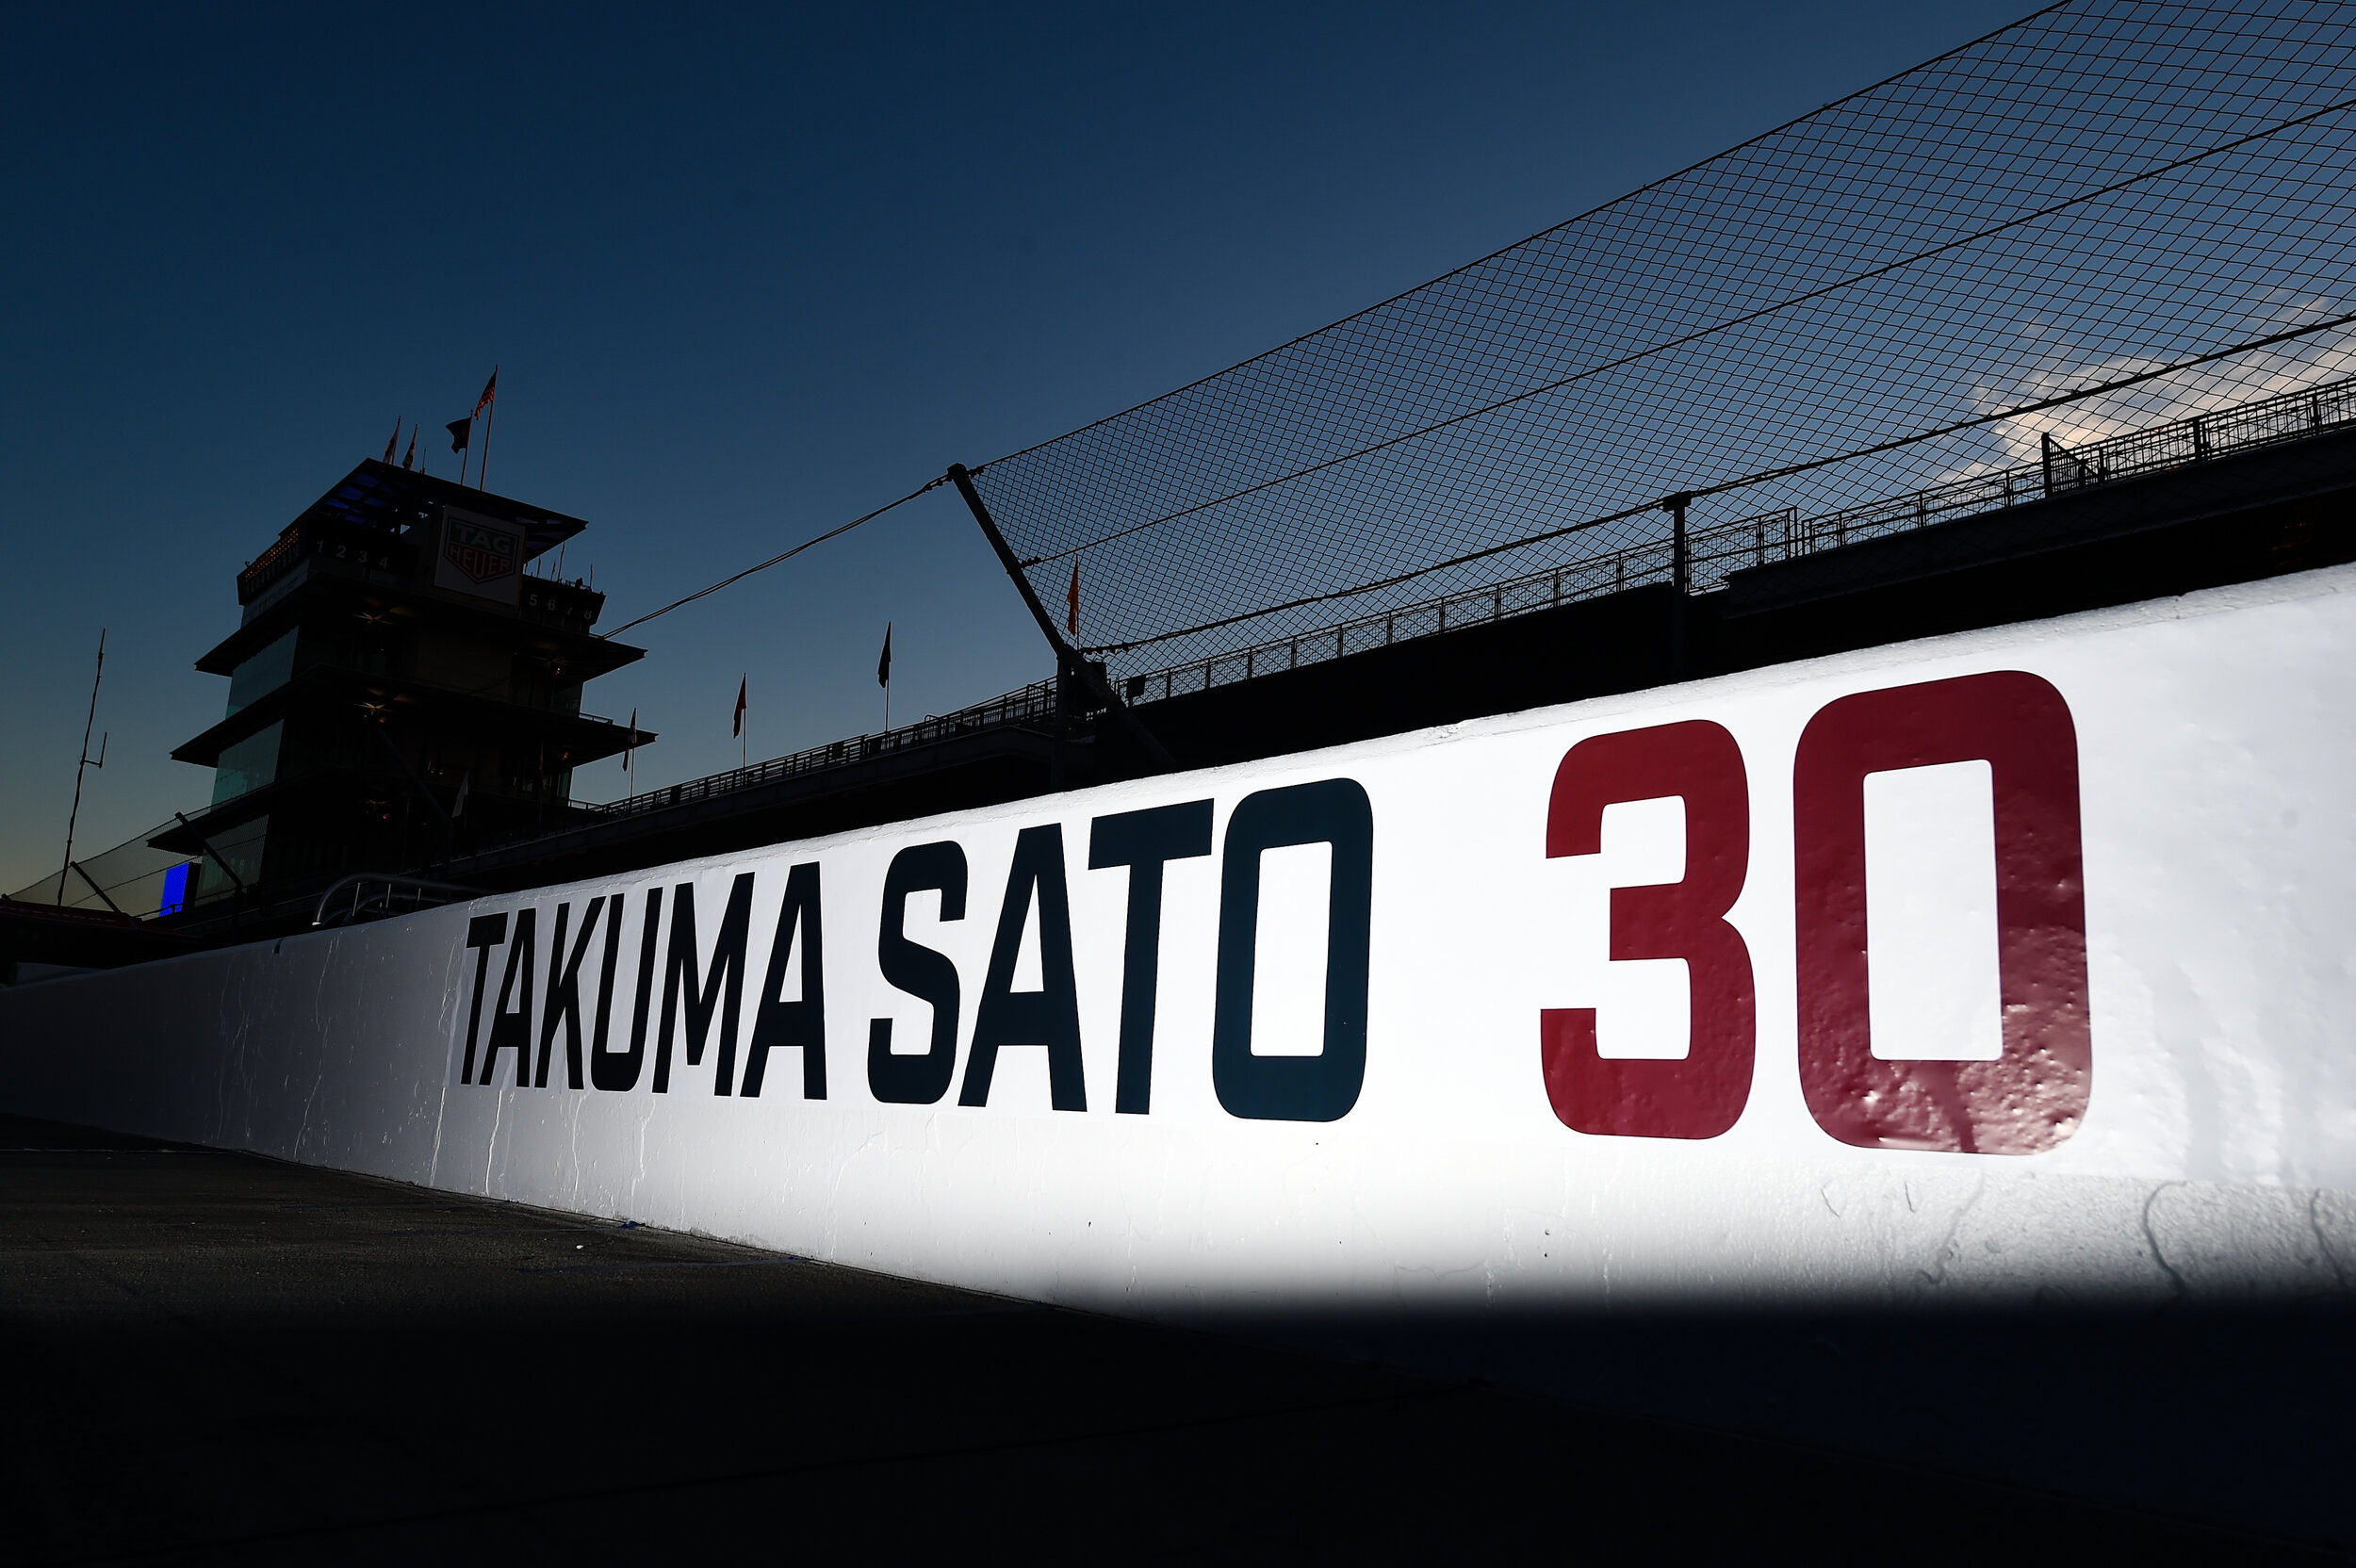   Indianapolis 500 Winning pit box of Takuma Sato. I love how still the image is knowing the amount of action that takes places in these pit boxes. 